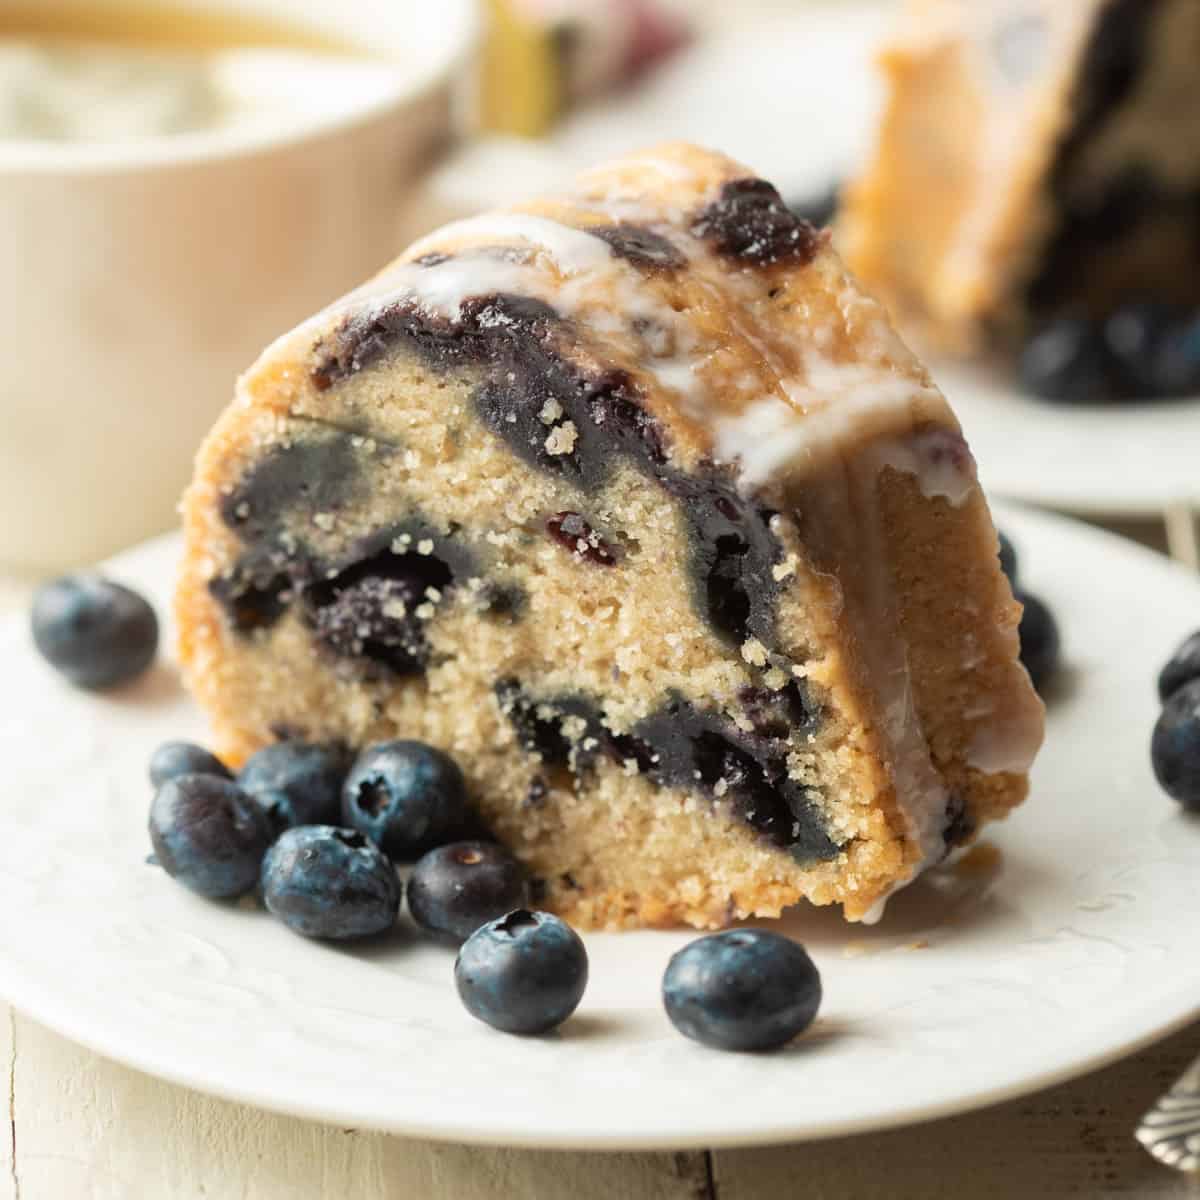 Slice of Vegan Blueberry Cake on a plate with fresh blueberries.